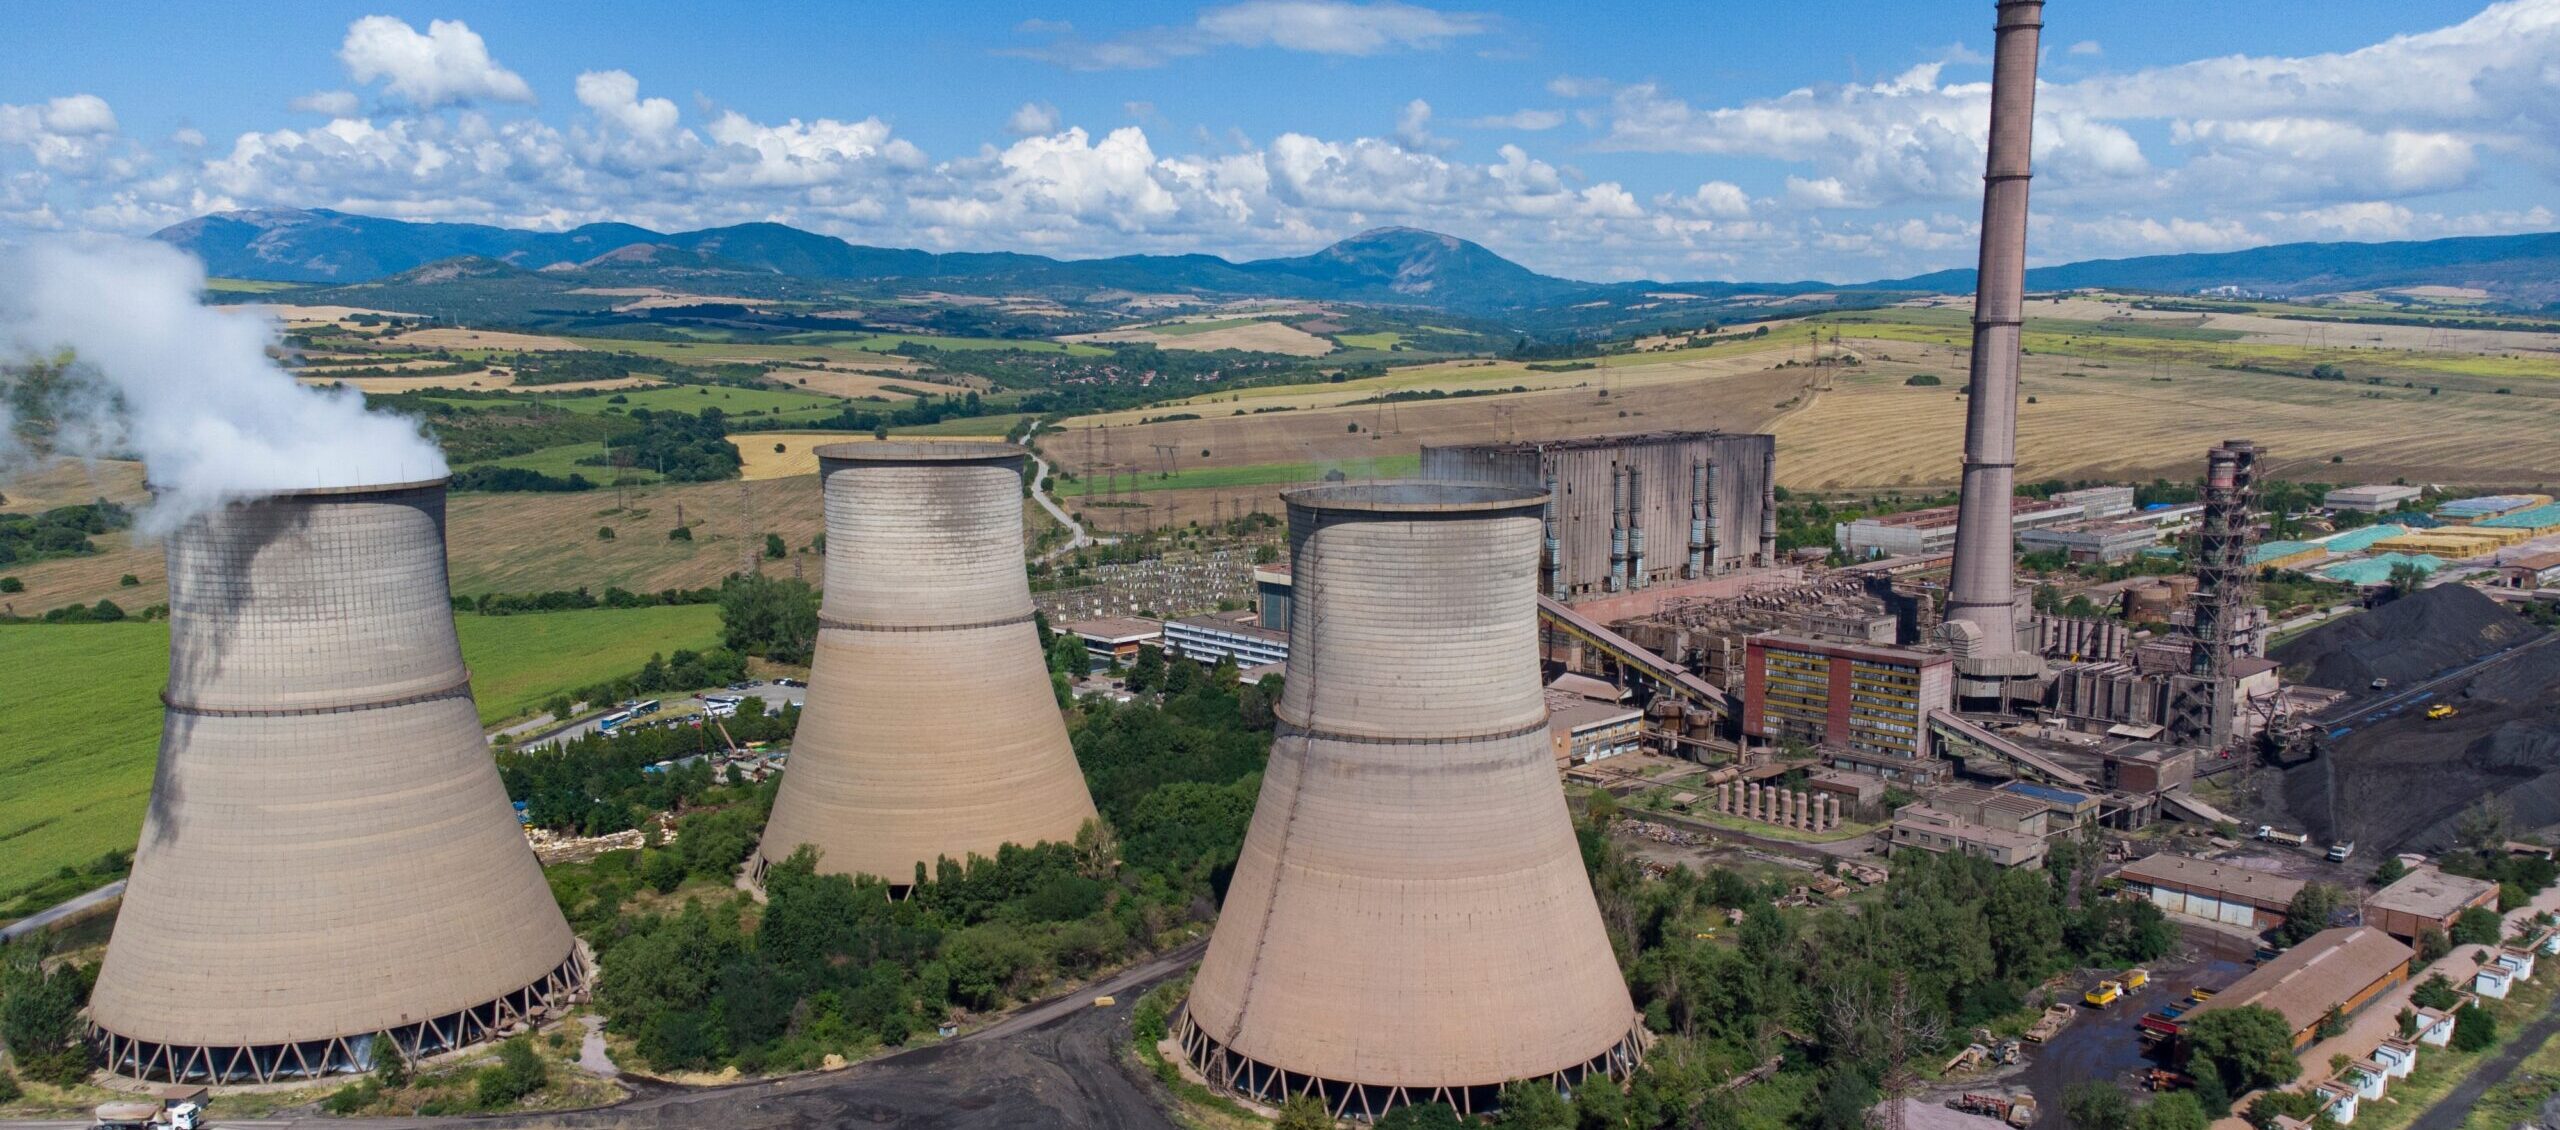 Lithuania ready to disassemble retired thermal power plants to aid Ukraine’s energy system